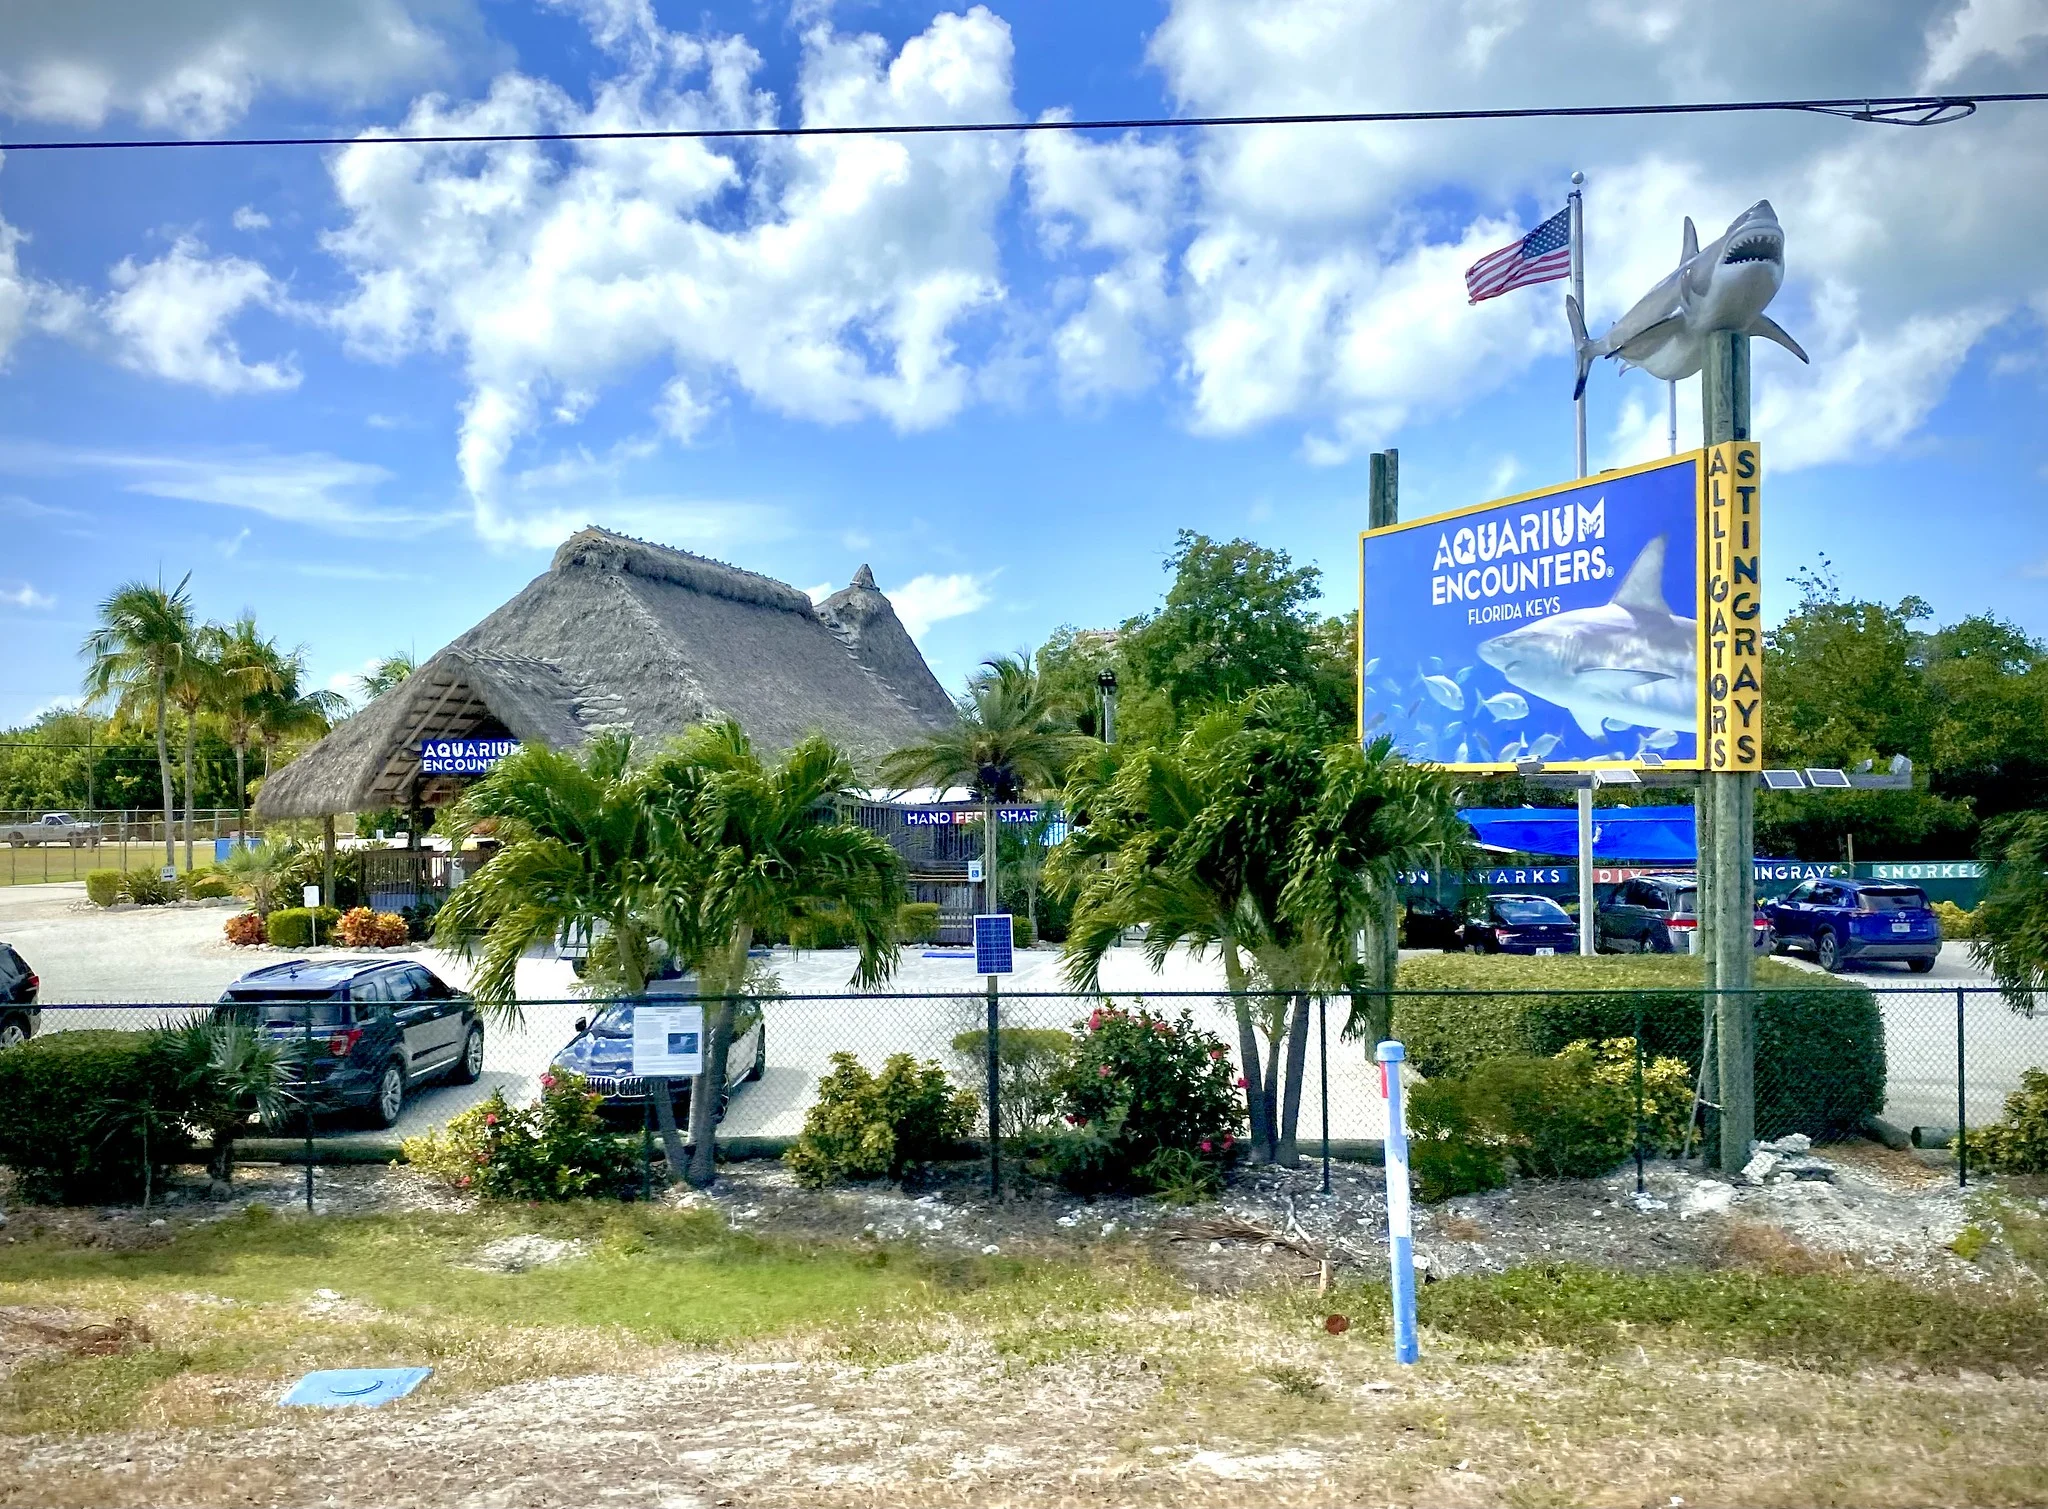 Exterior of Florida Keys Aquarium Encounters, known as one of the best aquariums in Florida, with parked cars and a shark figure above a signage 